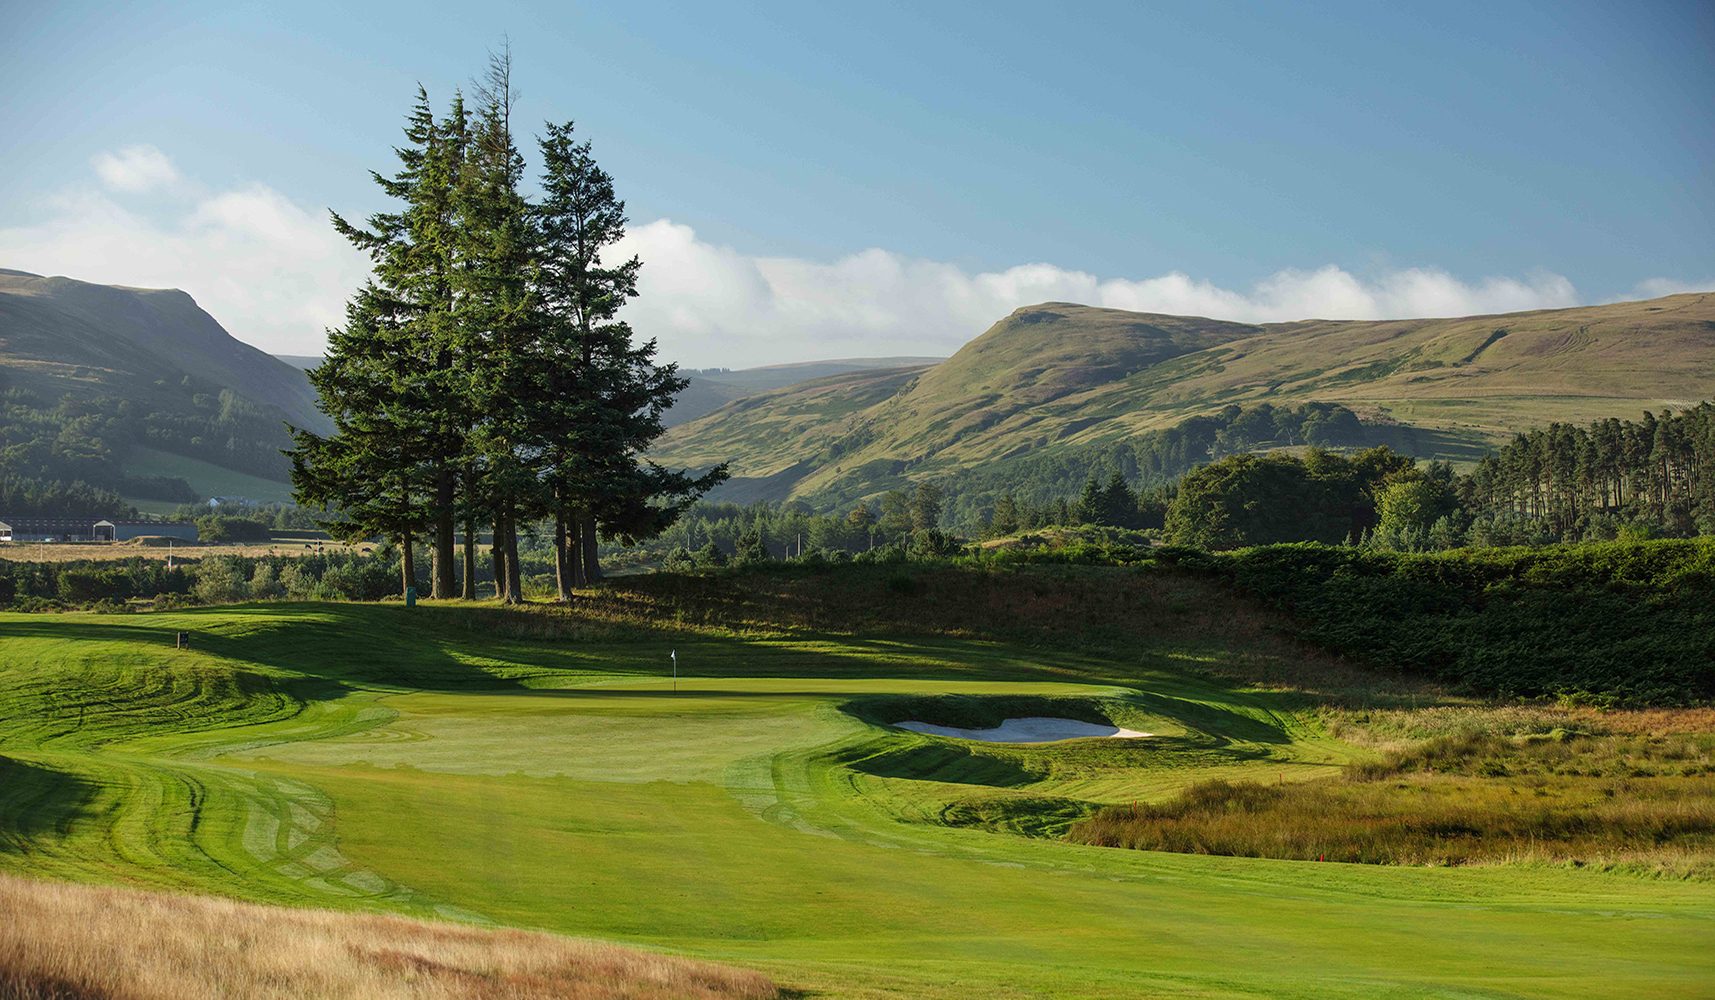 A view of the Gleneagles golf courses on an autumnal day with the Ochil Hills in the background